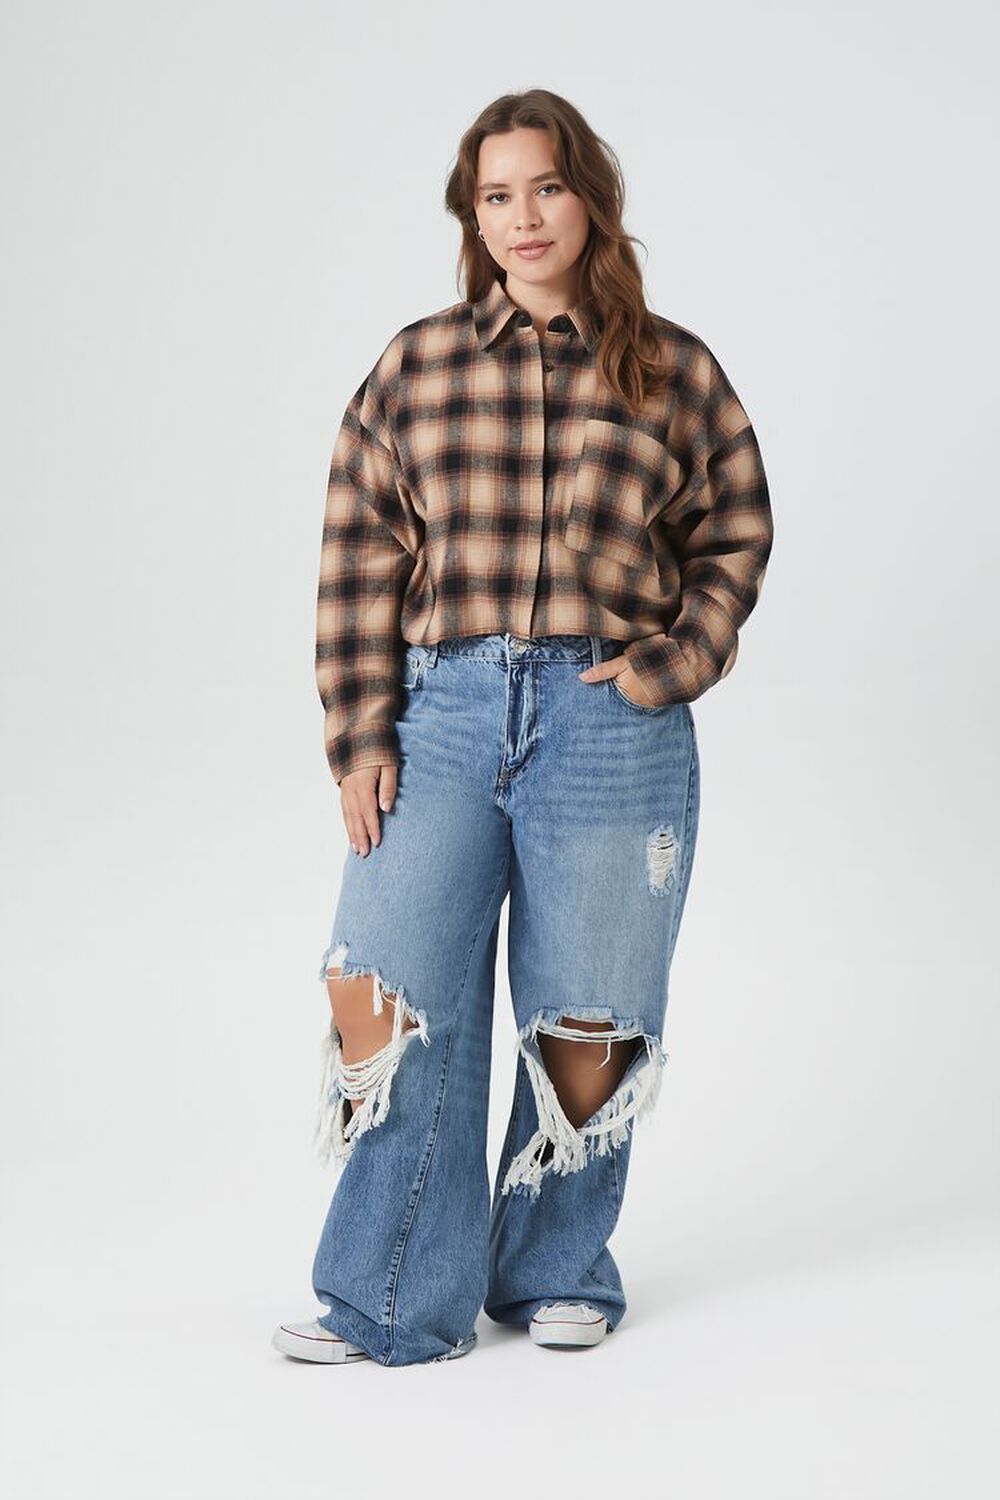 Cropped Flannel Shirt  Flannel shirt outfit, Plaid shirt outfits, Cropped  shirt outfit